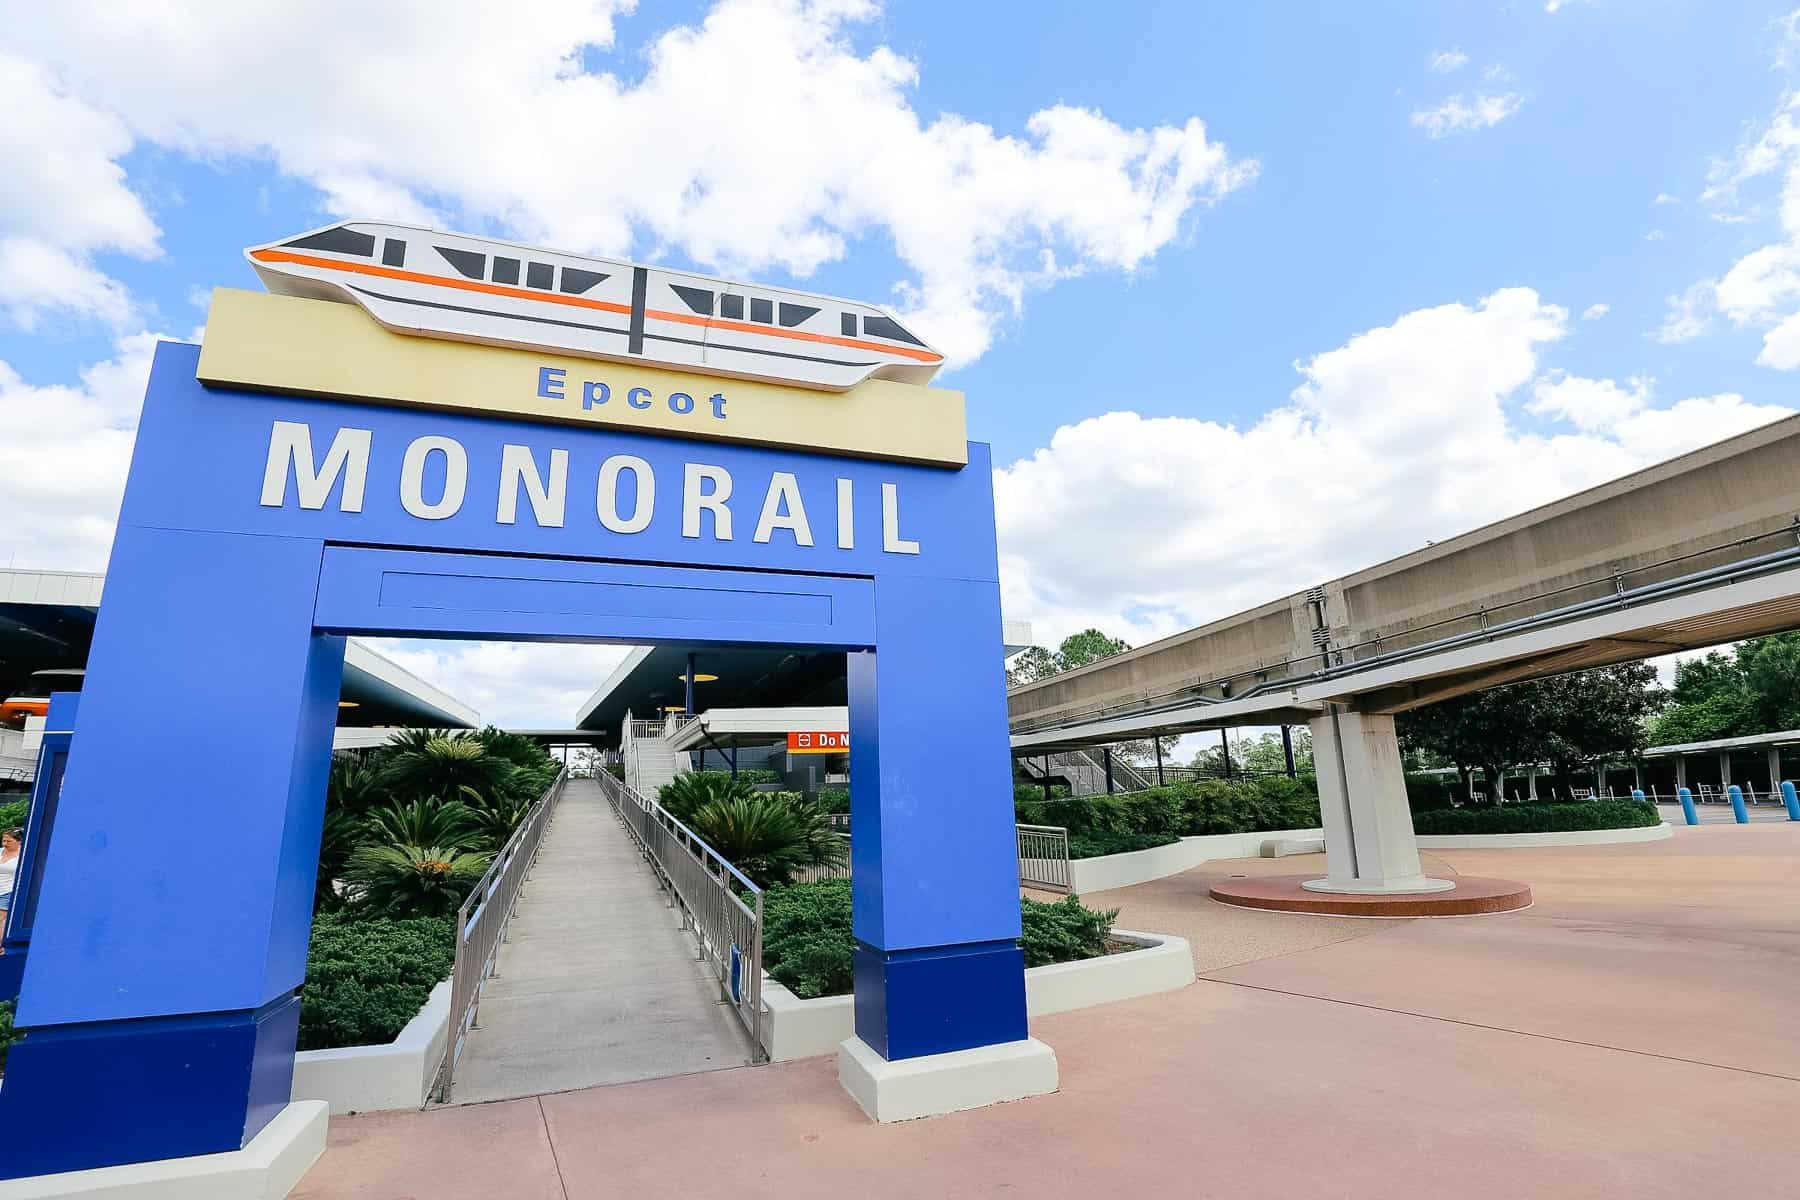 Grand Floridian to Epcot Monorail at the TTC 